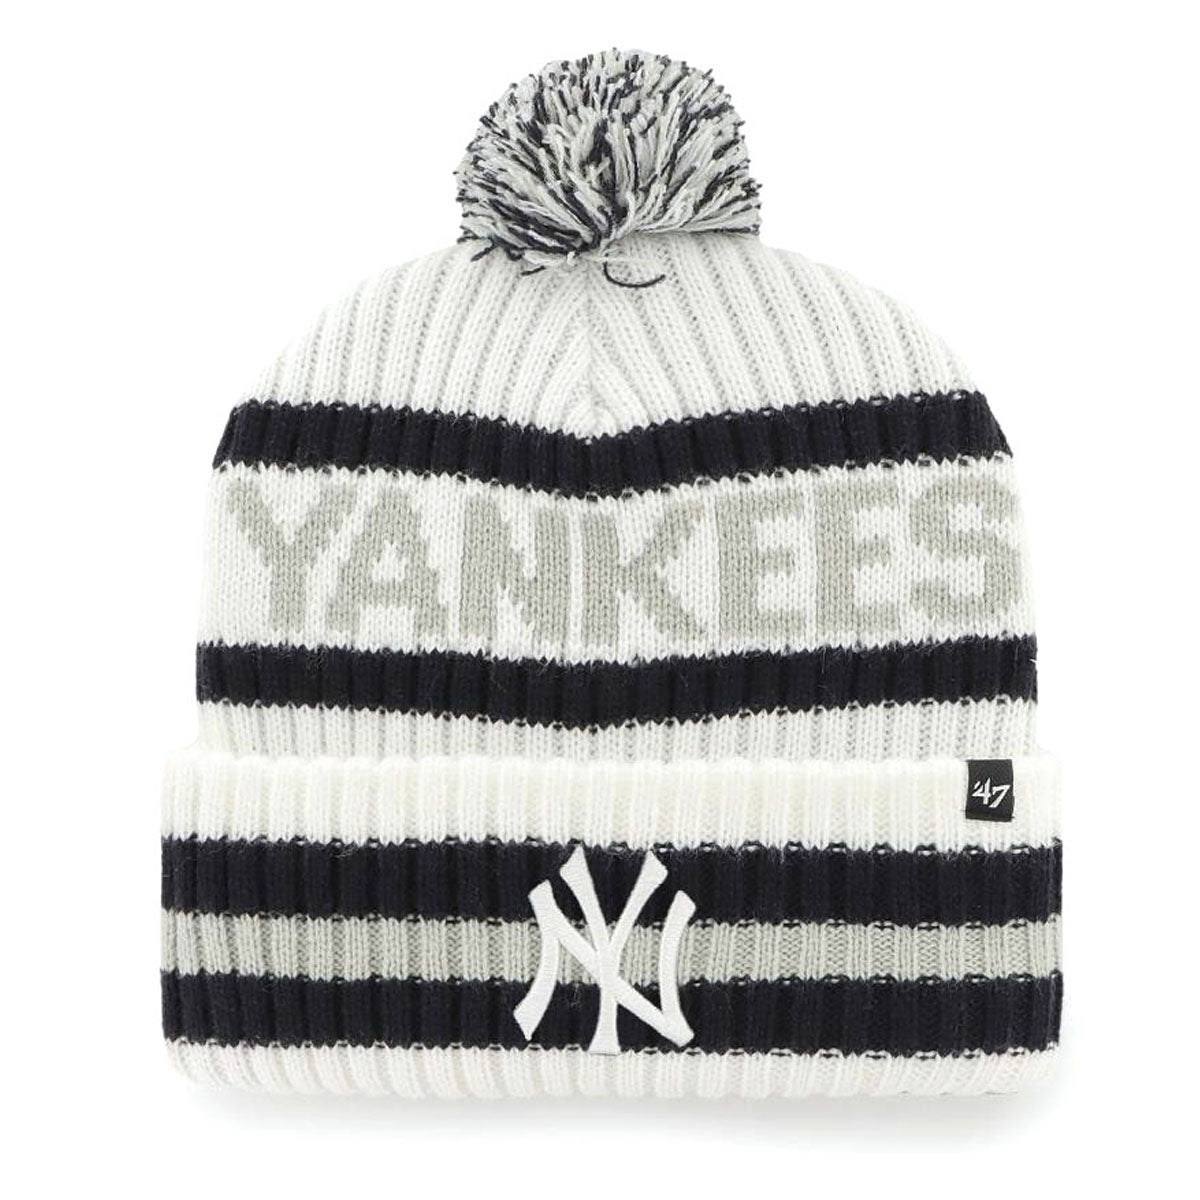 ’47 BRAND Yankees Bering 47 Cuff Knit WHITE 【BERNG17ACE】